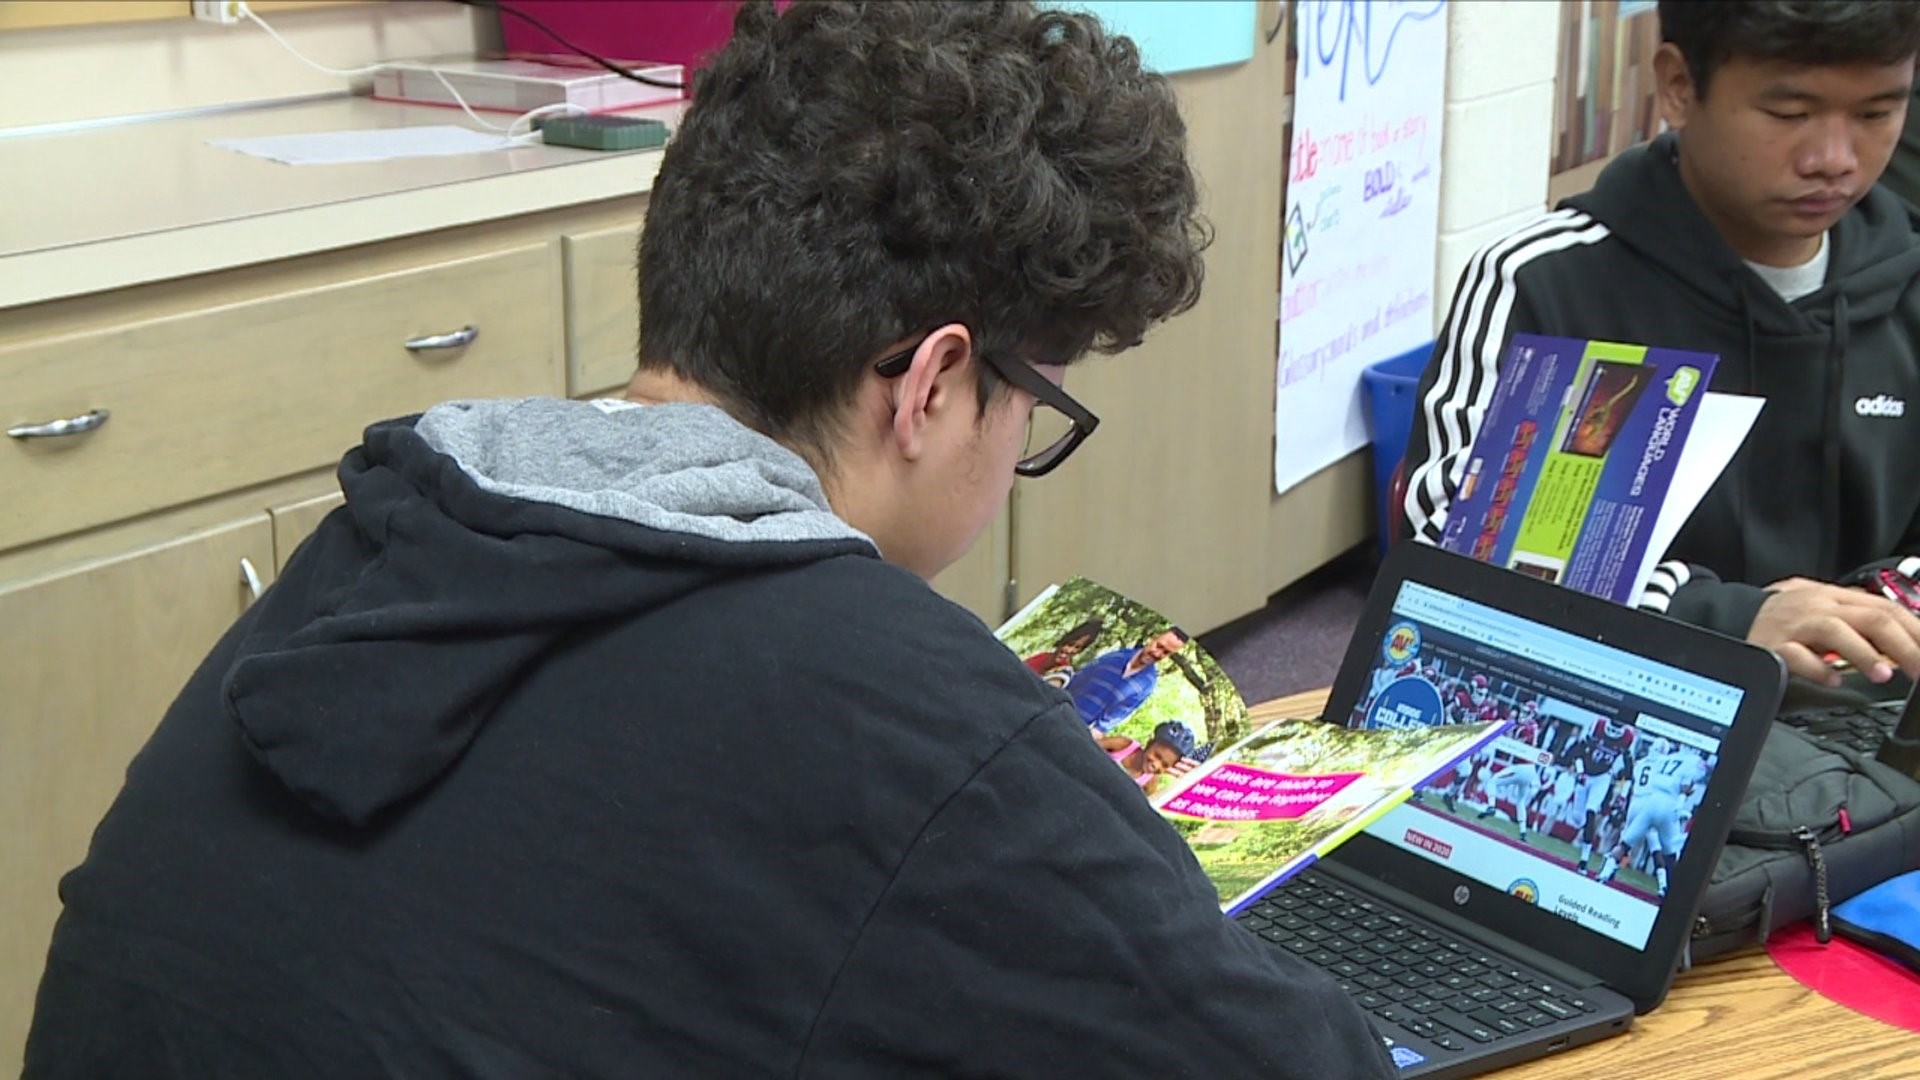 Multicultural Books at Moline schools help teach international students